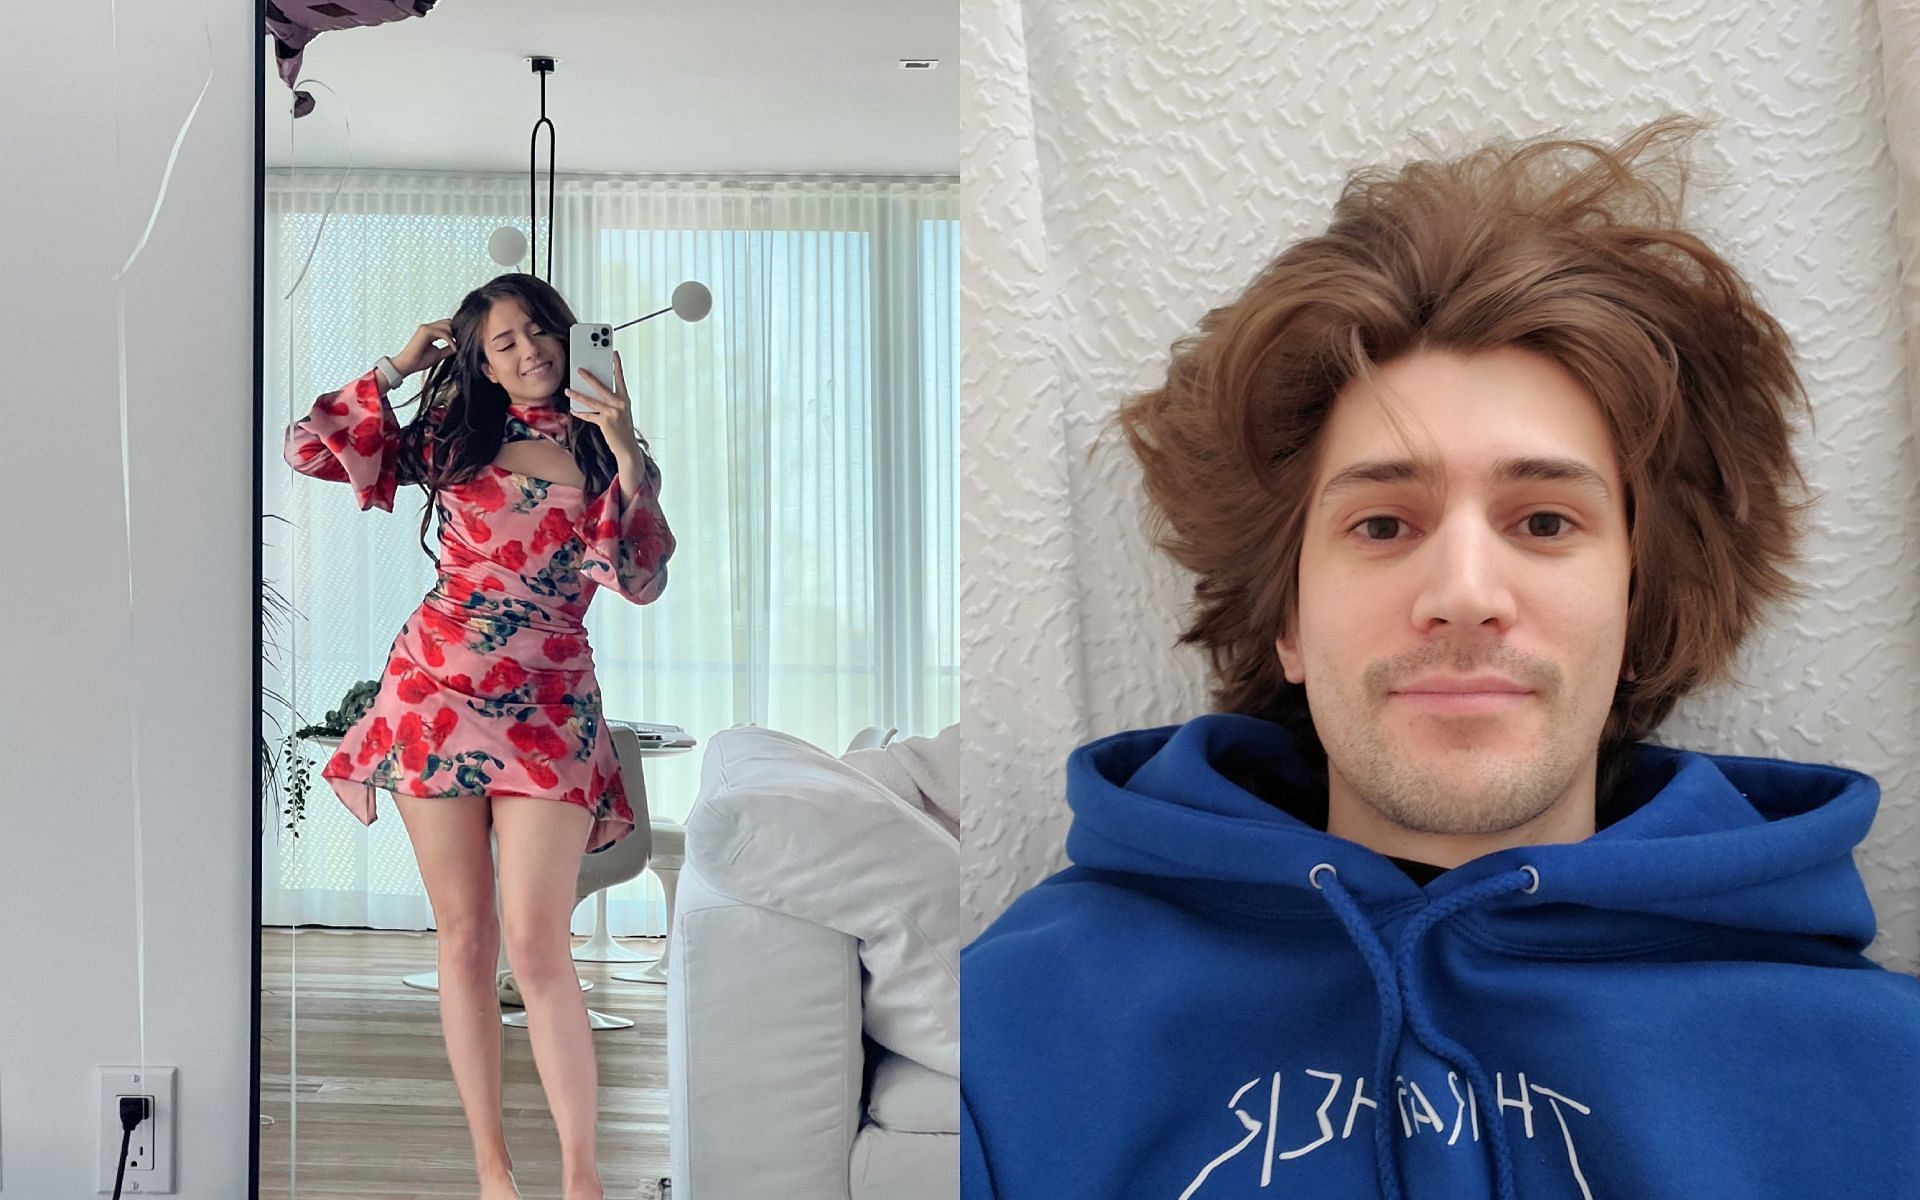 Pokimane and xQc got into an argument after the former defended Amber Heard (Images via Pokimanelol and xQc/Twitter)